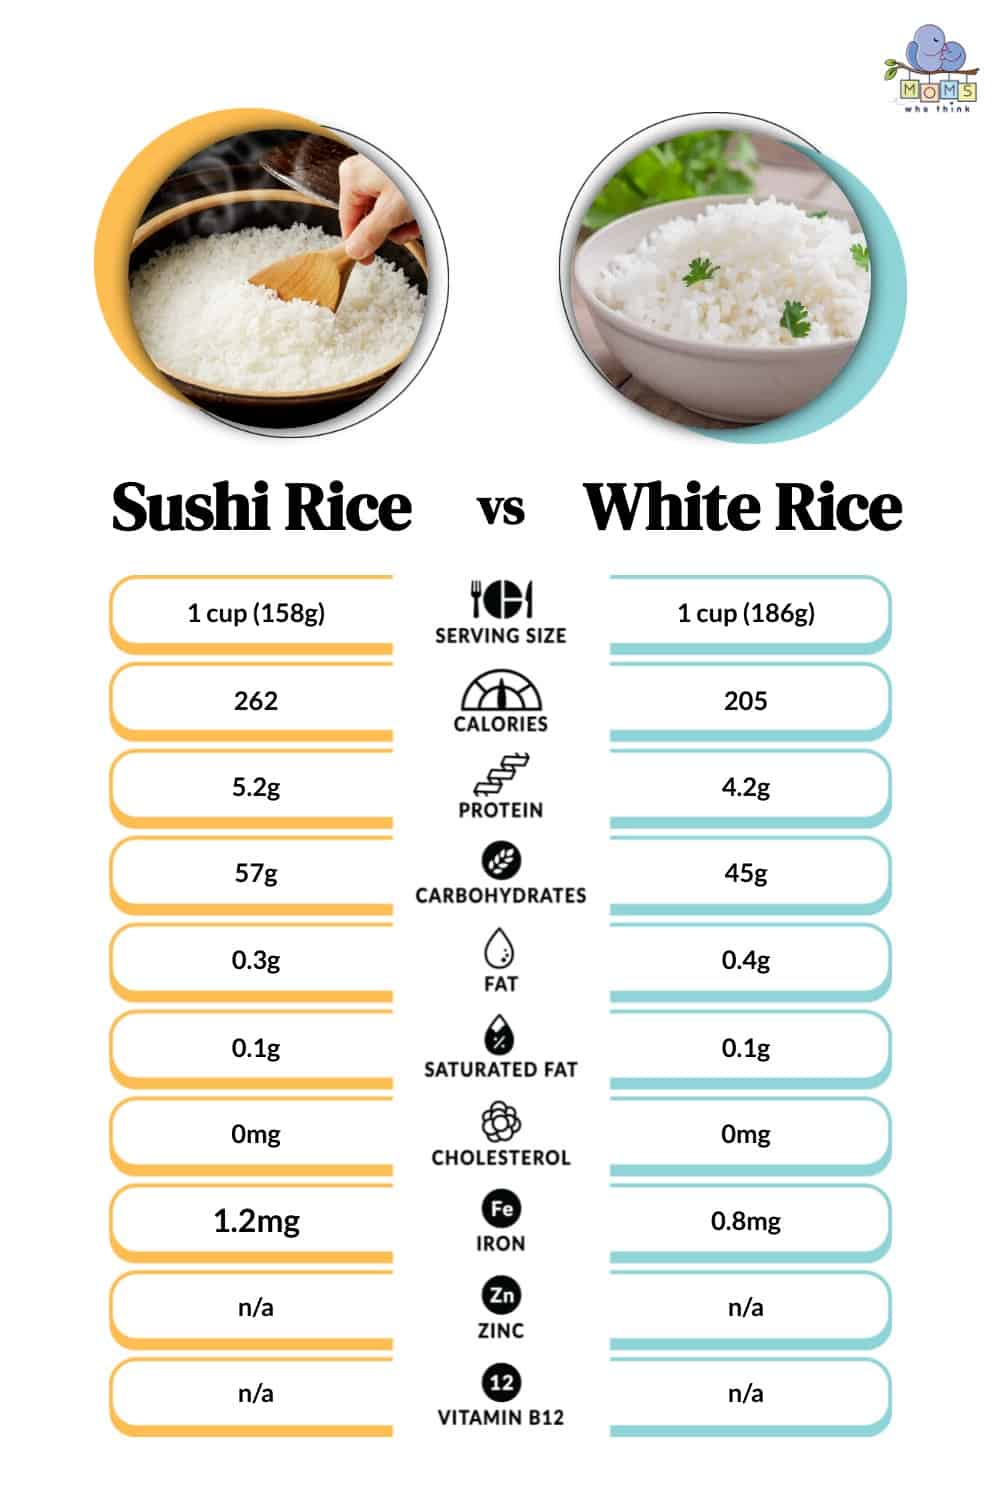 Sushi Rice vs White Rice Nutritional Facts